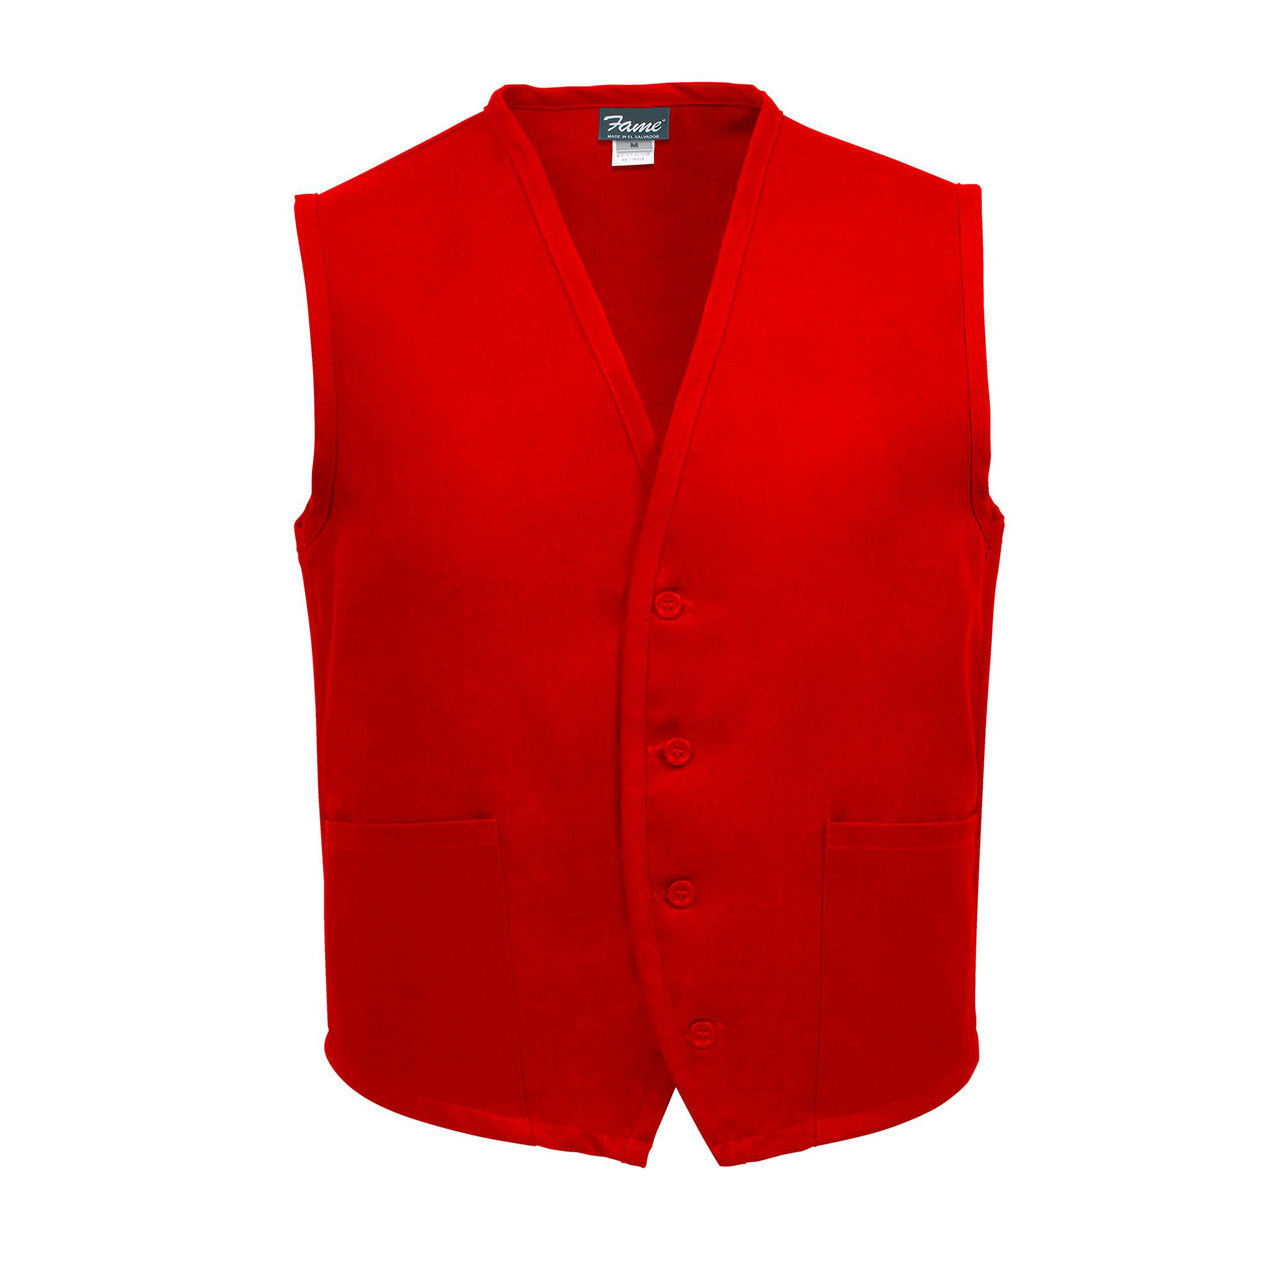 What are the attributes of the red vest - Unisex Uniform Vest, 2 Pocket?